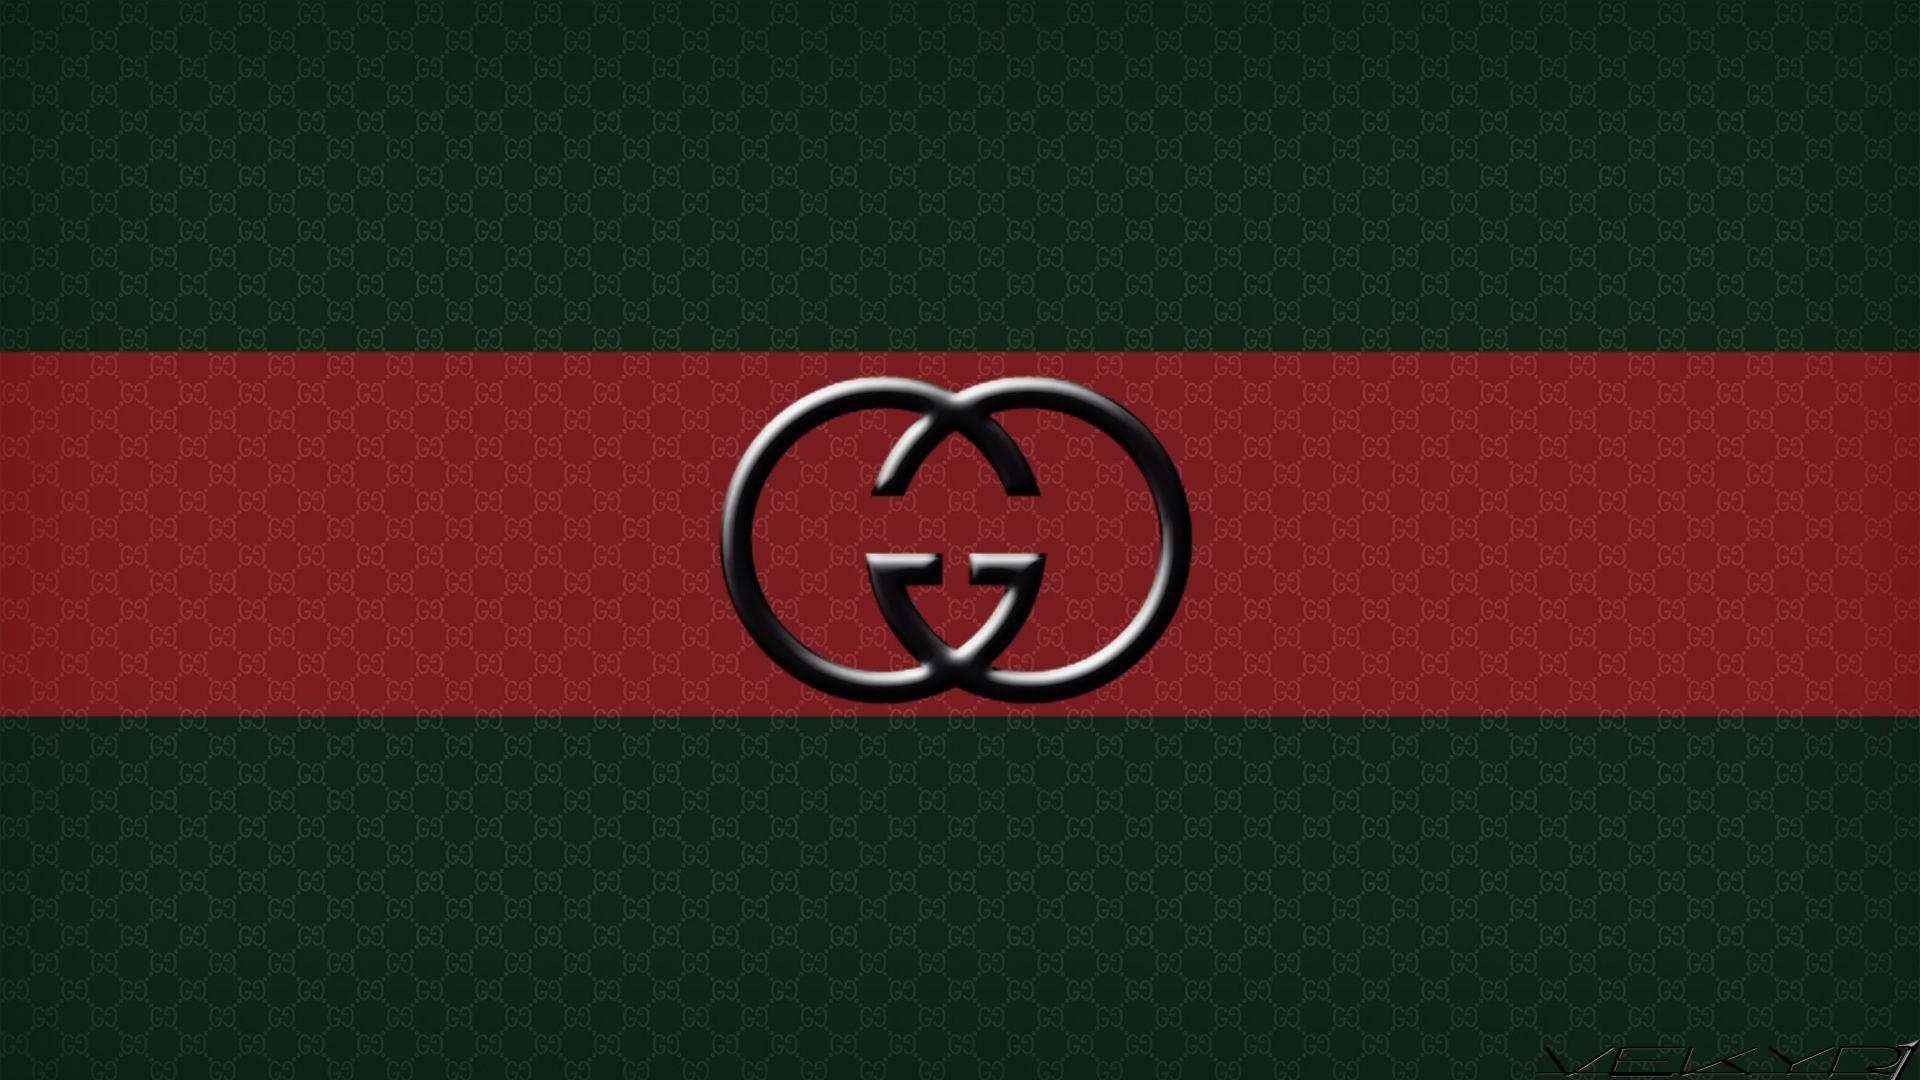 Gucci Anime Wallpapers - Wallpaper Cave